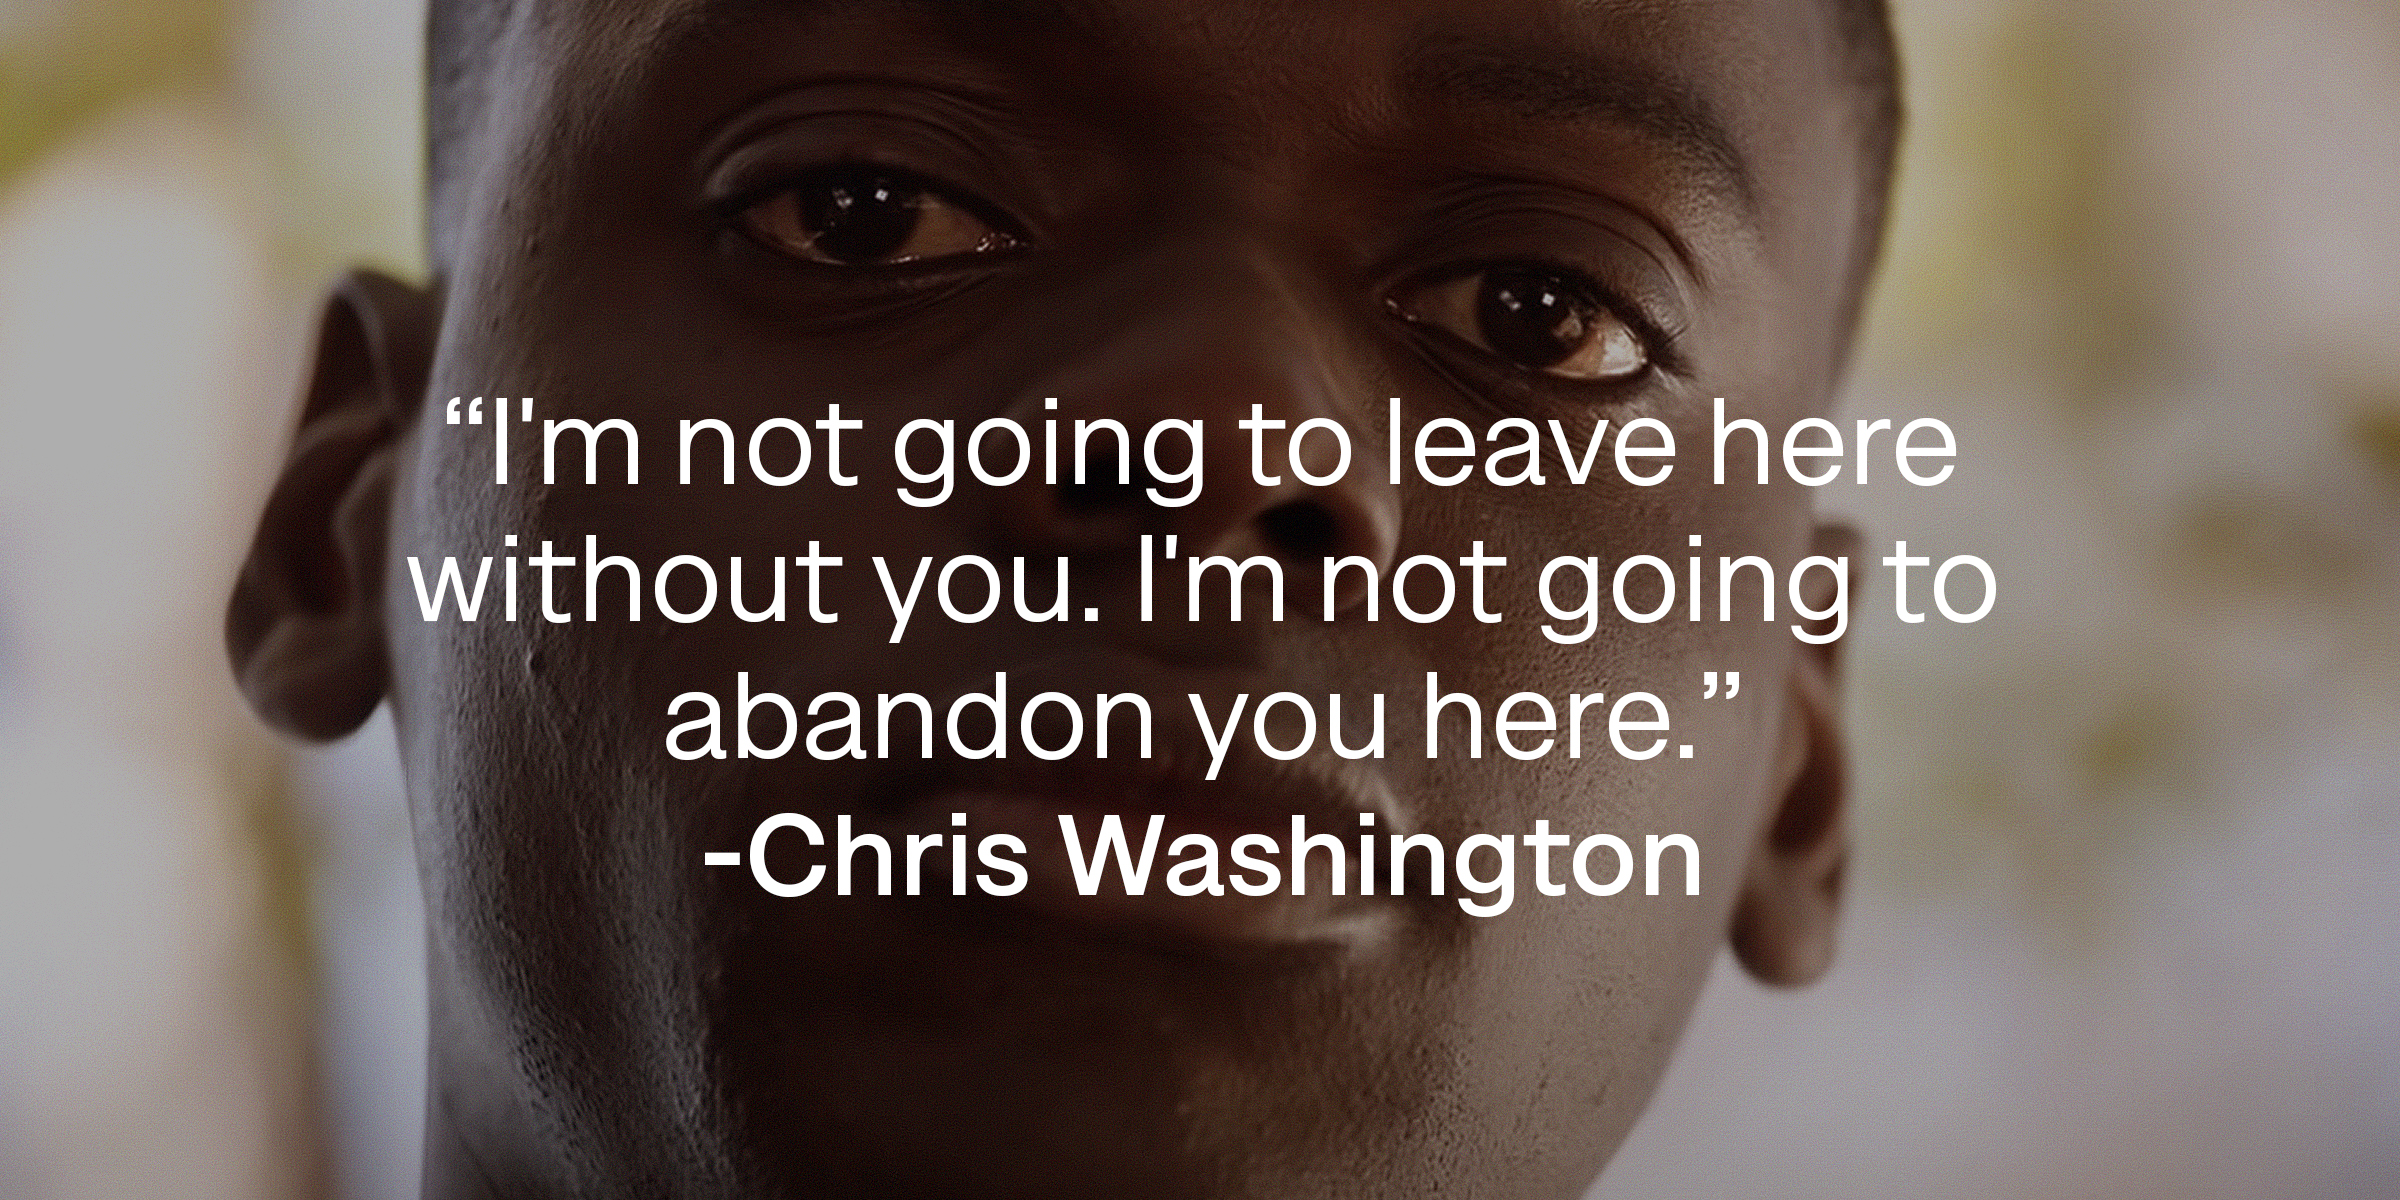 An image of Chris Washington with his quote: “I'm not going to leave here without you. I'm not going to abandon you here.” | Source: youtube.com/UniversalpicturesIta